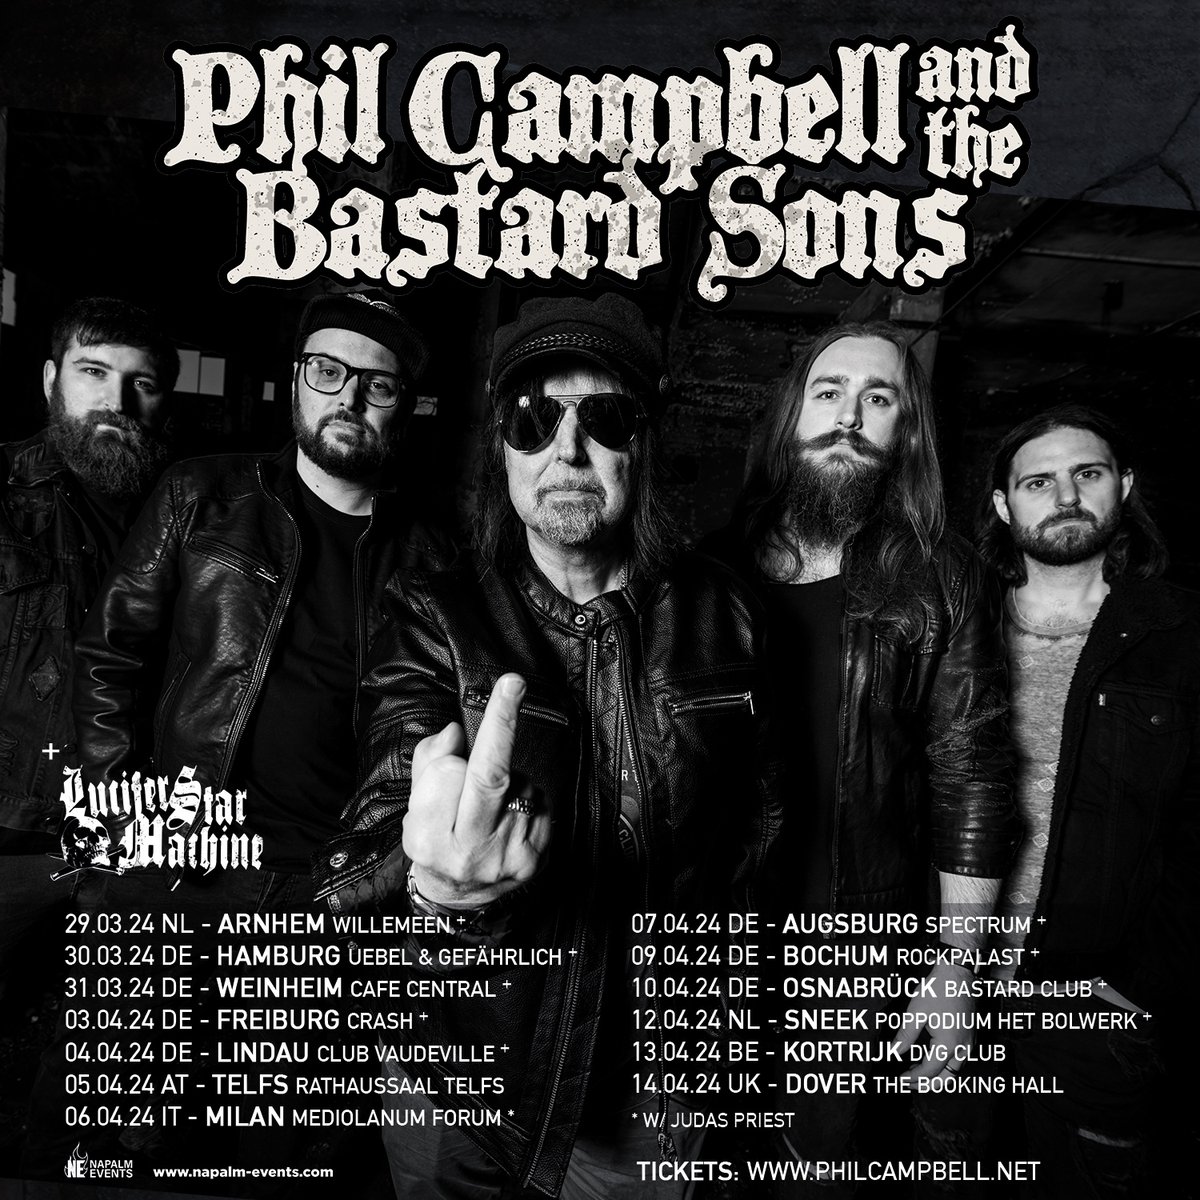 Make sure you catch @PCATBS on tour playing shows in the Netherlands, Belgium, Germany, Austria, Italy & the UK!